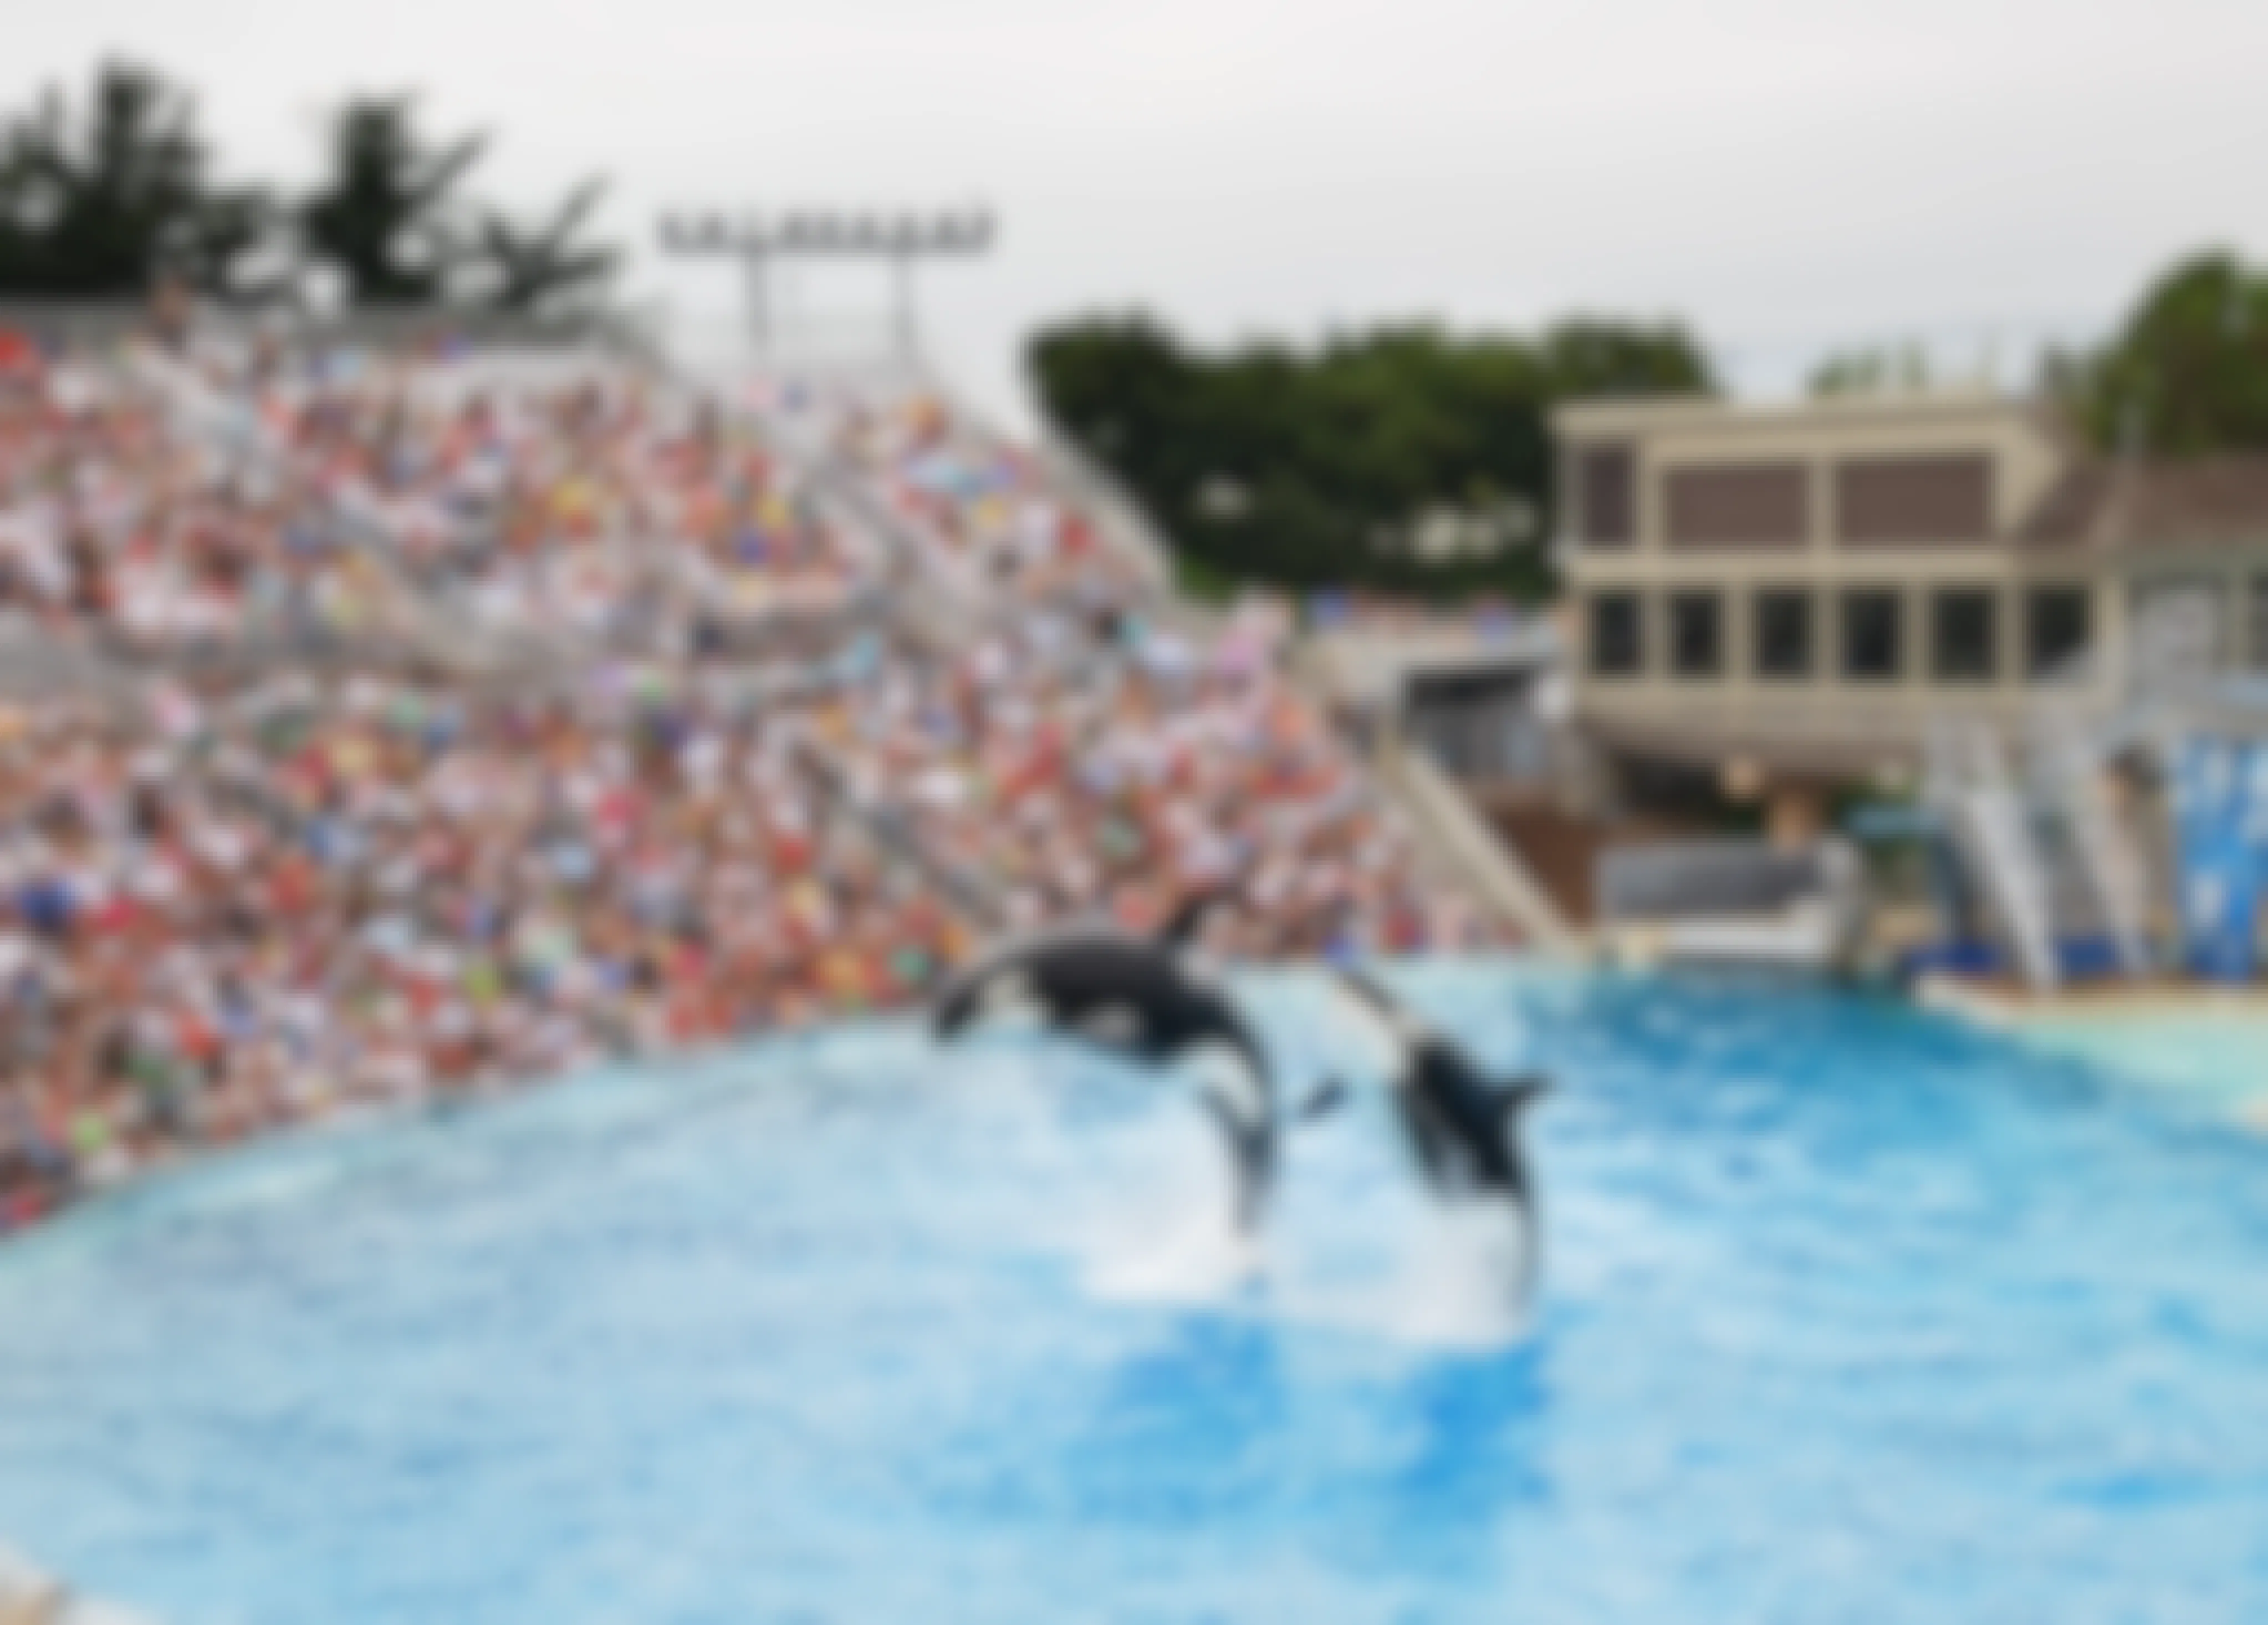 An orca jumping up out of the pool at SeaWorld San Diego with a full crowd of visitors watching in the stands